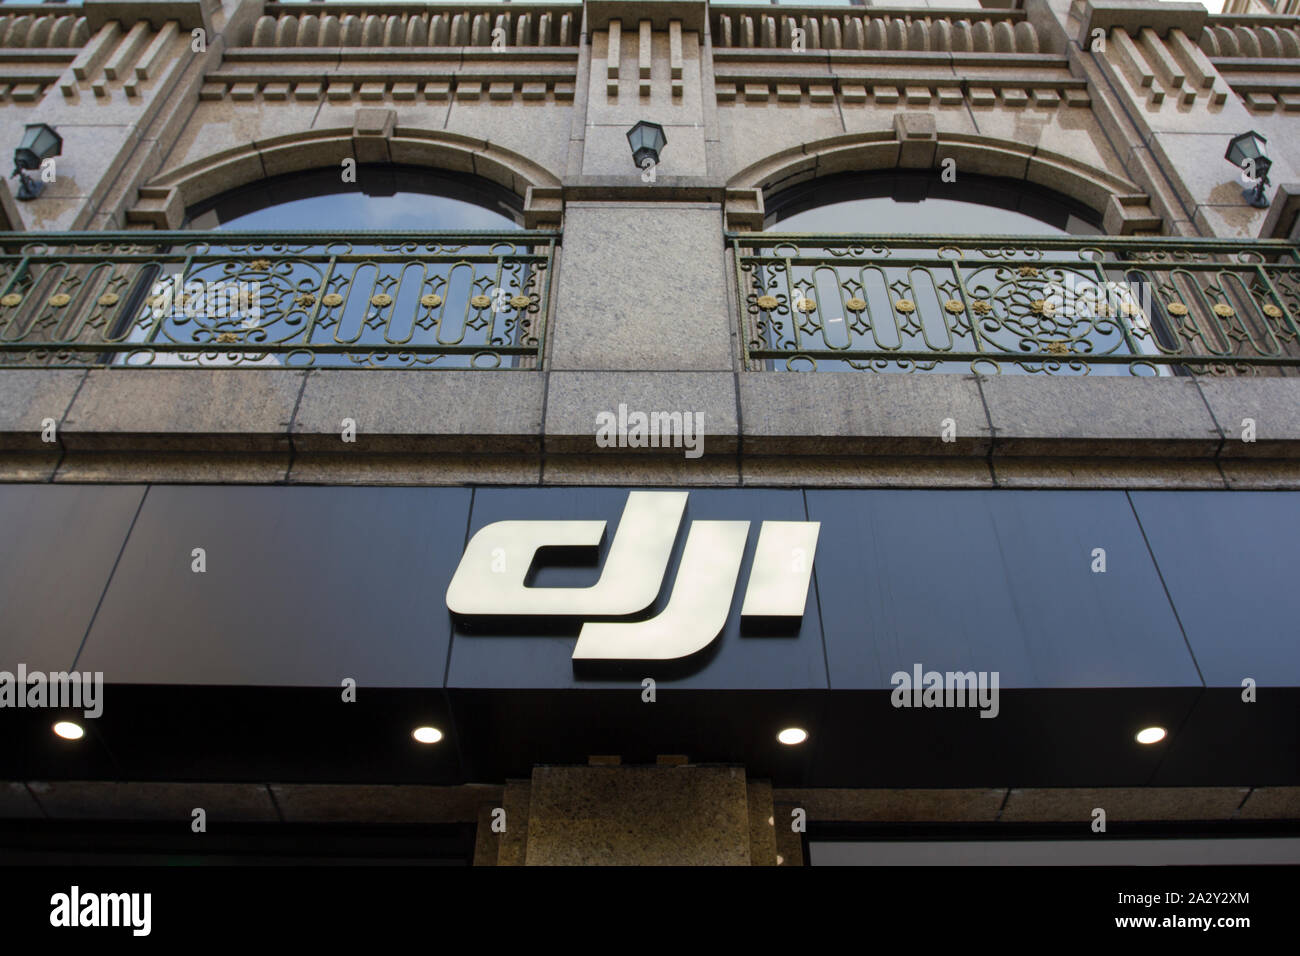 The DJI logo at a DJI store in downtown Shanghai. DJI is a Chinese technology company known as a manufacturer of unmanned aerial vehicles. Stock Photo